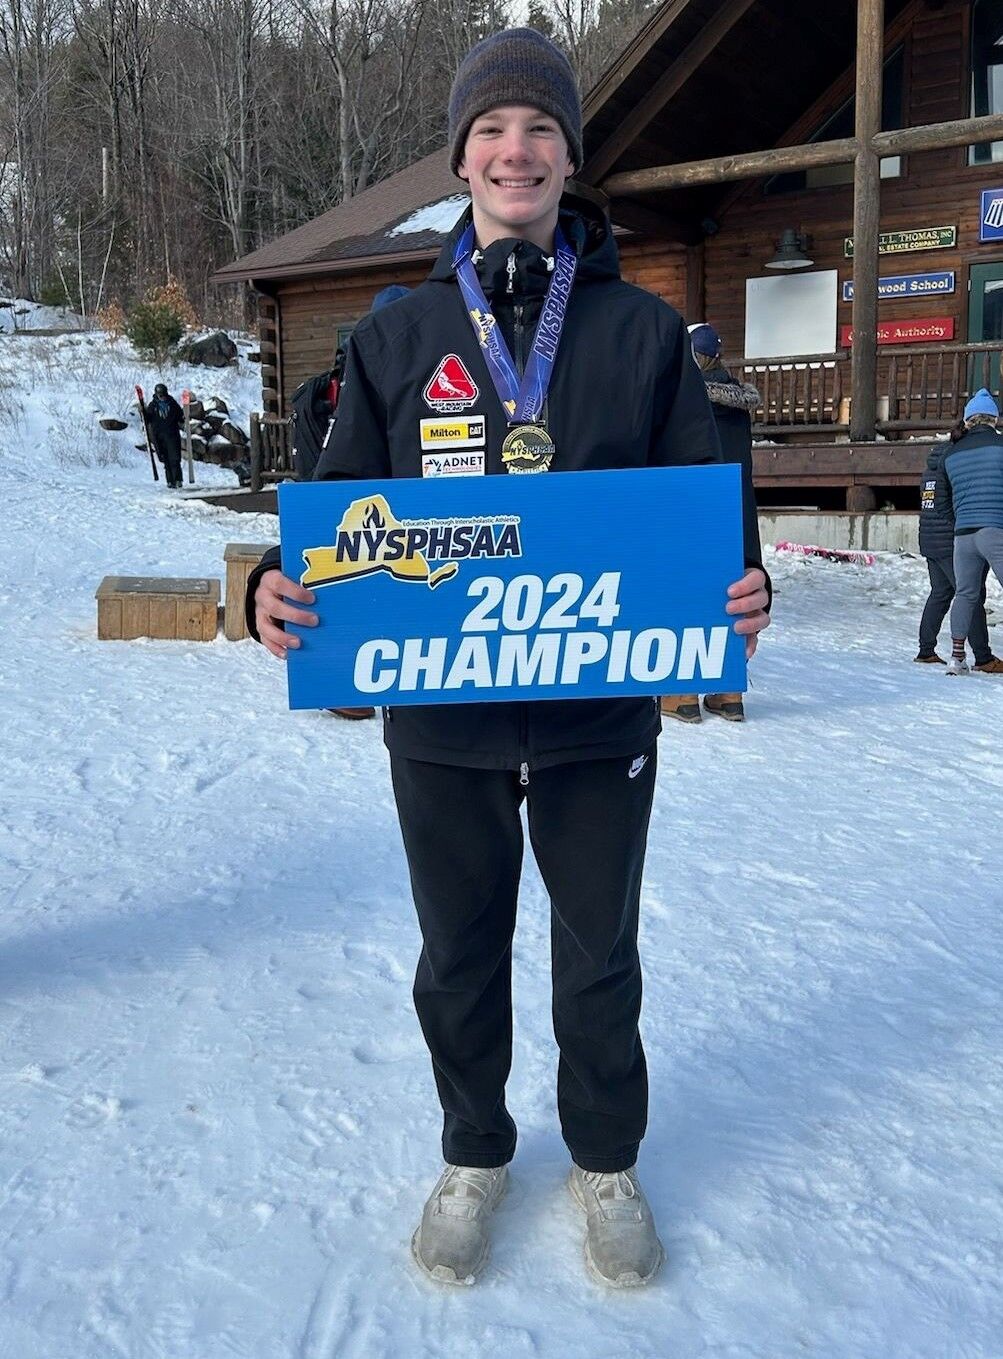 Queensbury Freshman Hudson Montgomery Wins State Giant Slalom Championship at Whiteface Mountain